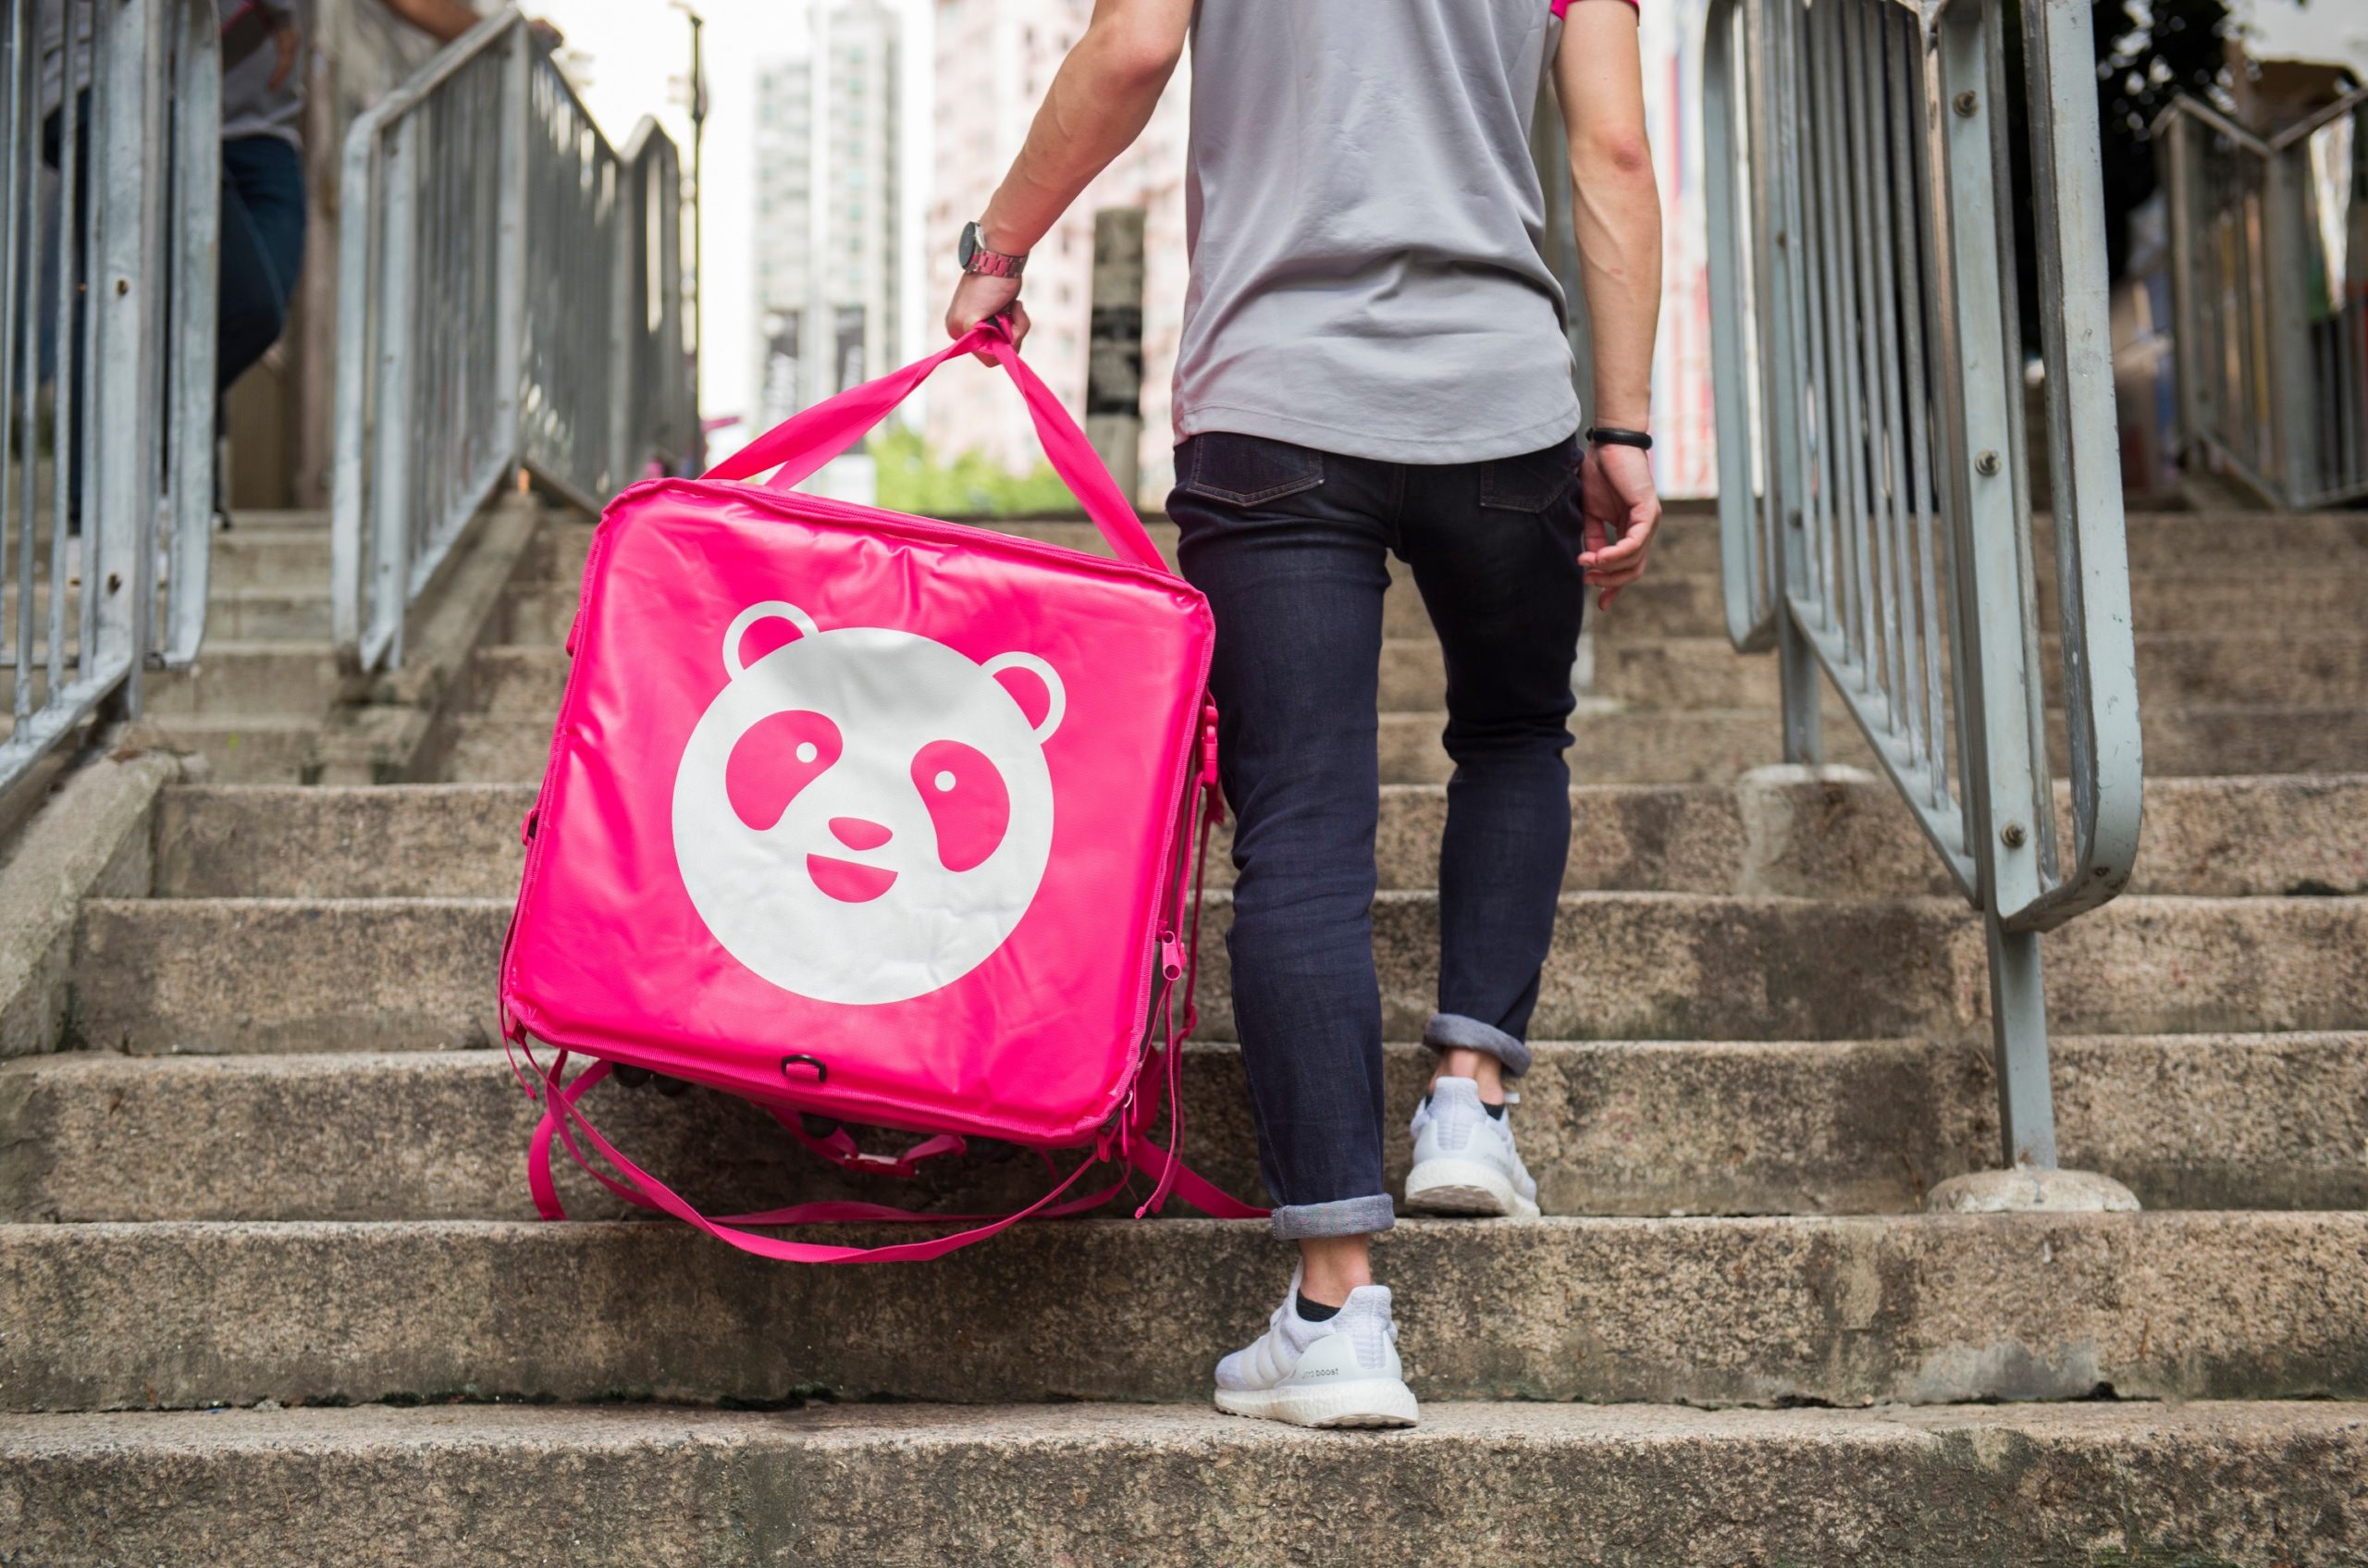 foodpanda Philippines launches contactless delivery